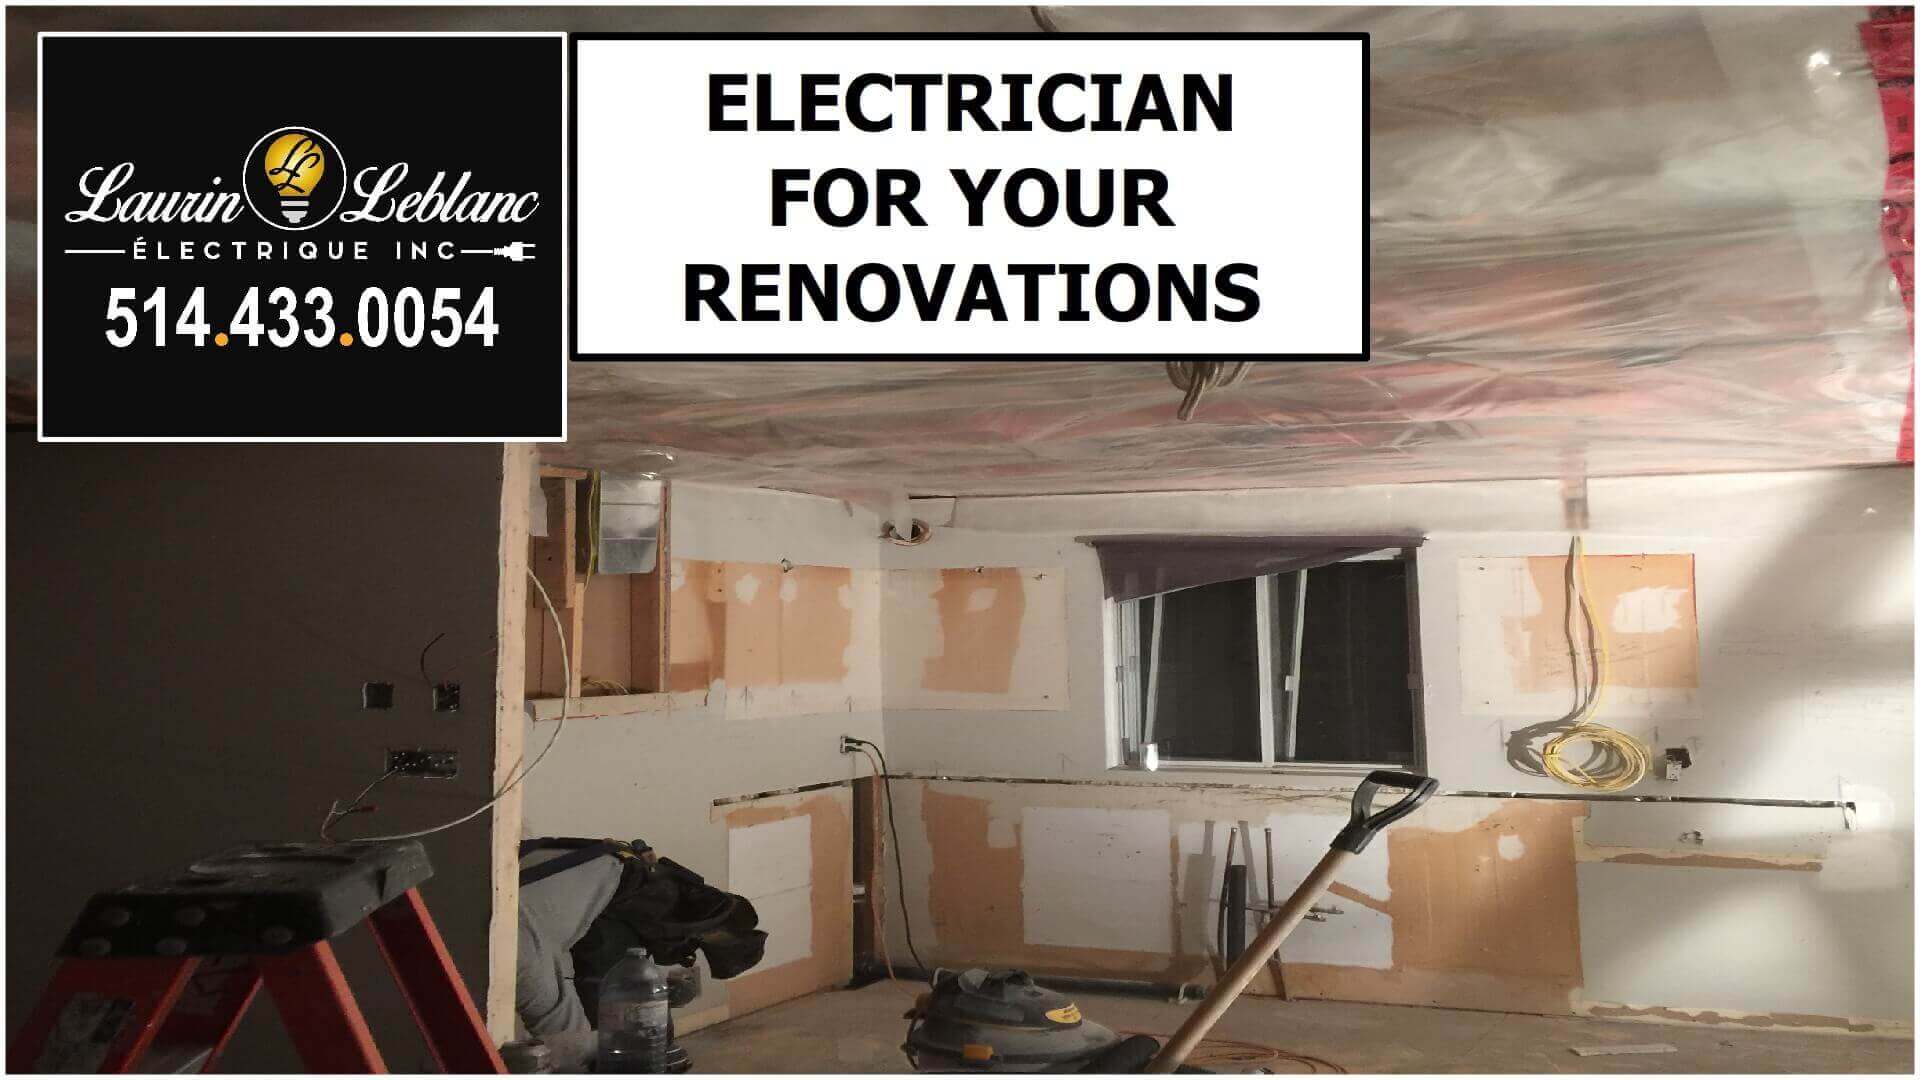 Electrician Renovations in Rigaud